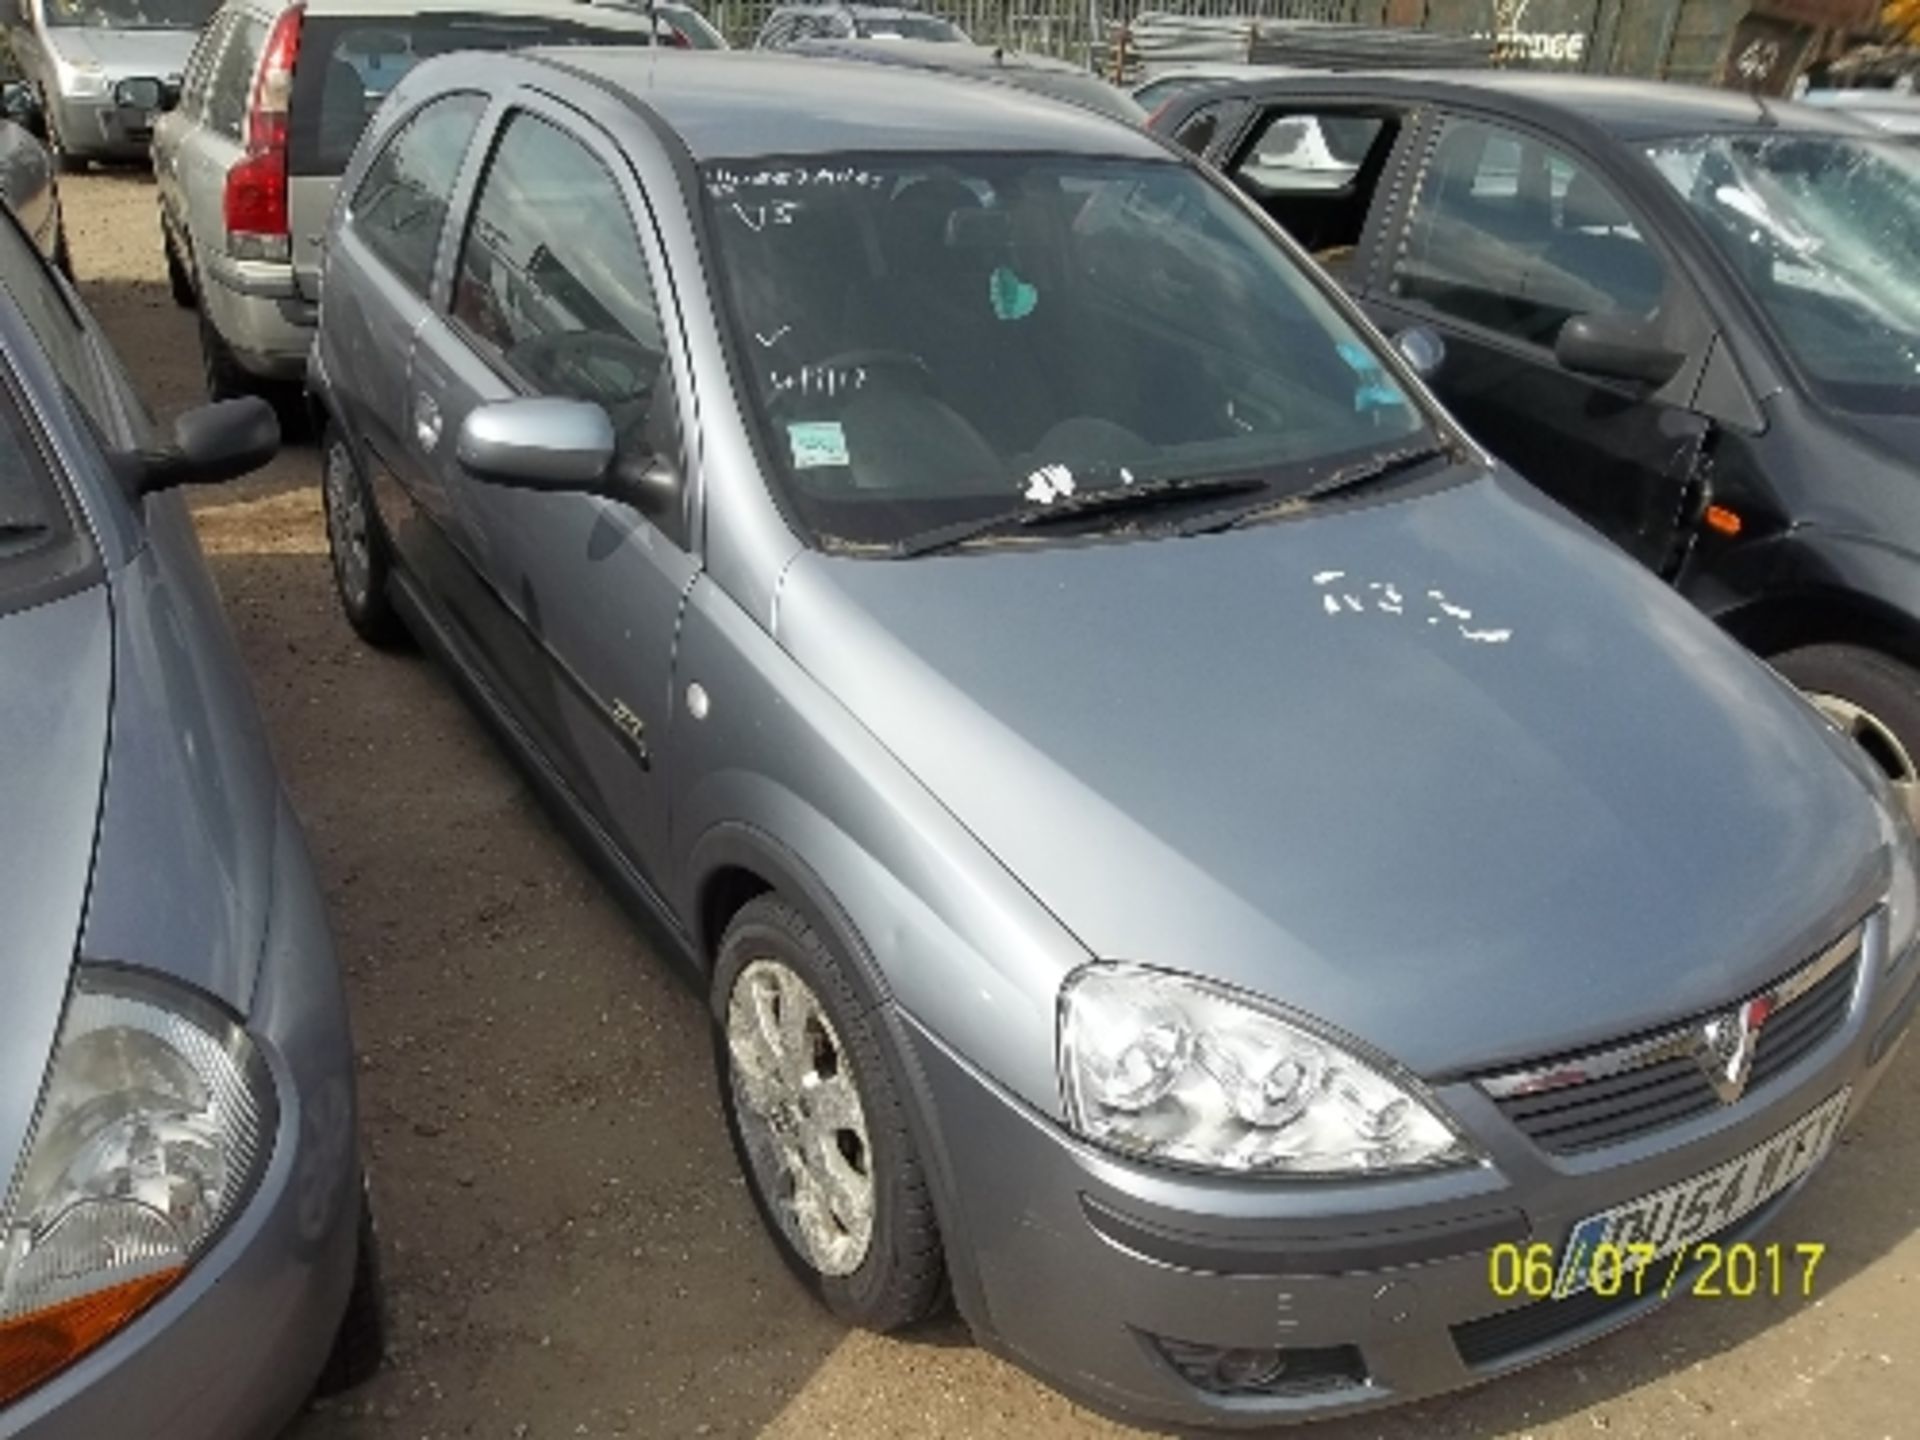 Vauxhall Corsa SXI CDTI - DU54 WTY Date of registration: 10.09.2004 1248cc, diesel, manual, silver - Image 2 of 4